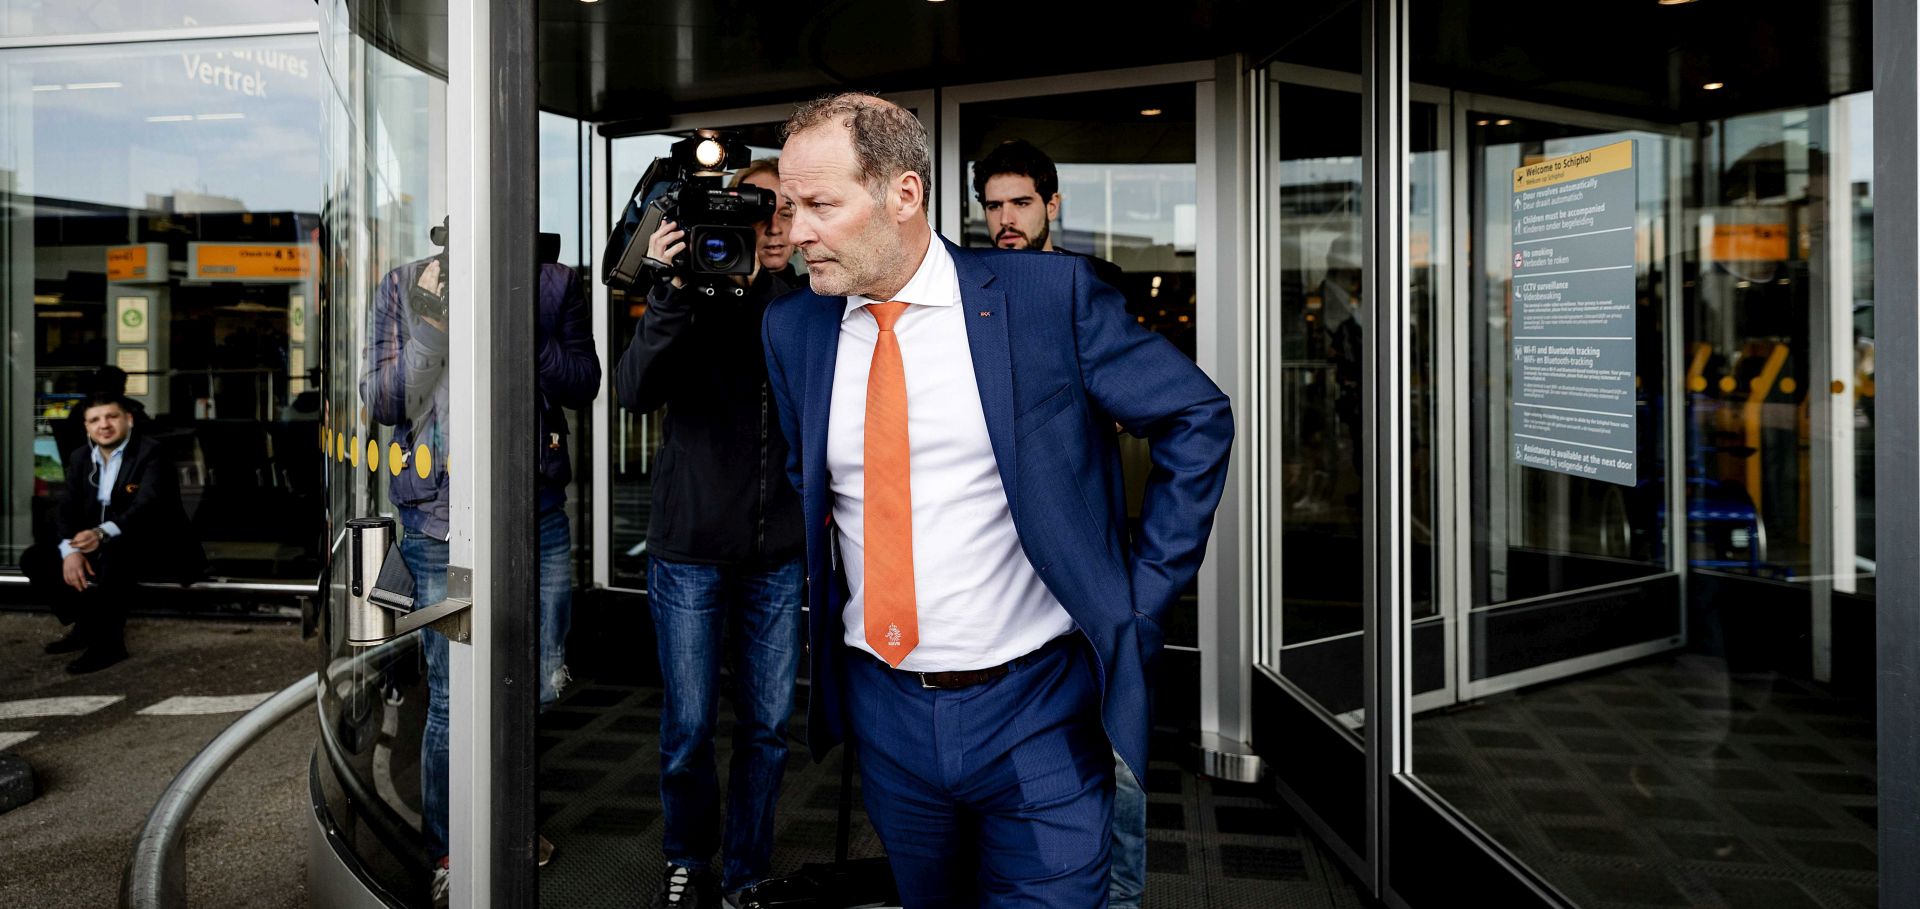 epa05871750 Dutch national soccer team head coach Danny Blind arrives at Schiphol Airport, The Netherlands, 26 March 2017, after the FIFA World Cup 2018 qualifying group A soccer match between Bulgaria and the Netherlands in Sofia, Bulgaria.  EPA/ROBIN VAN LONKHUIJSEN